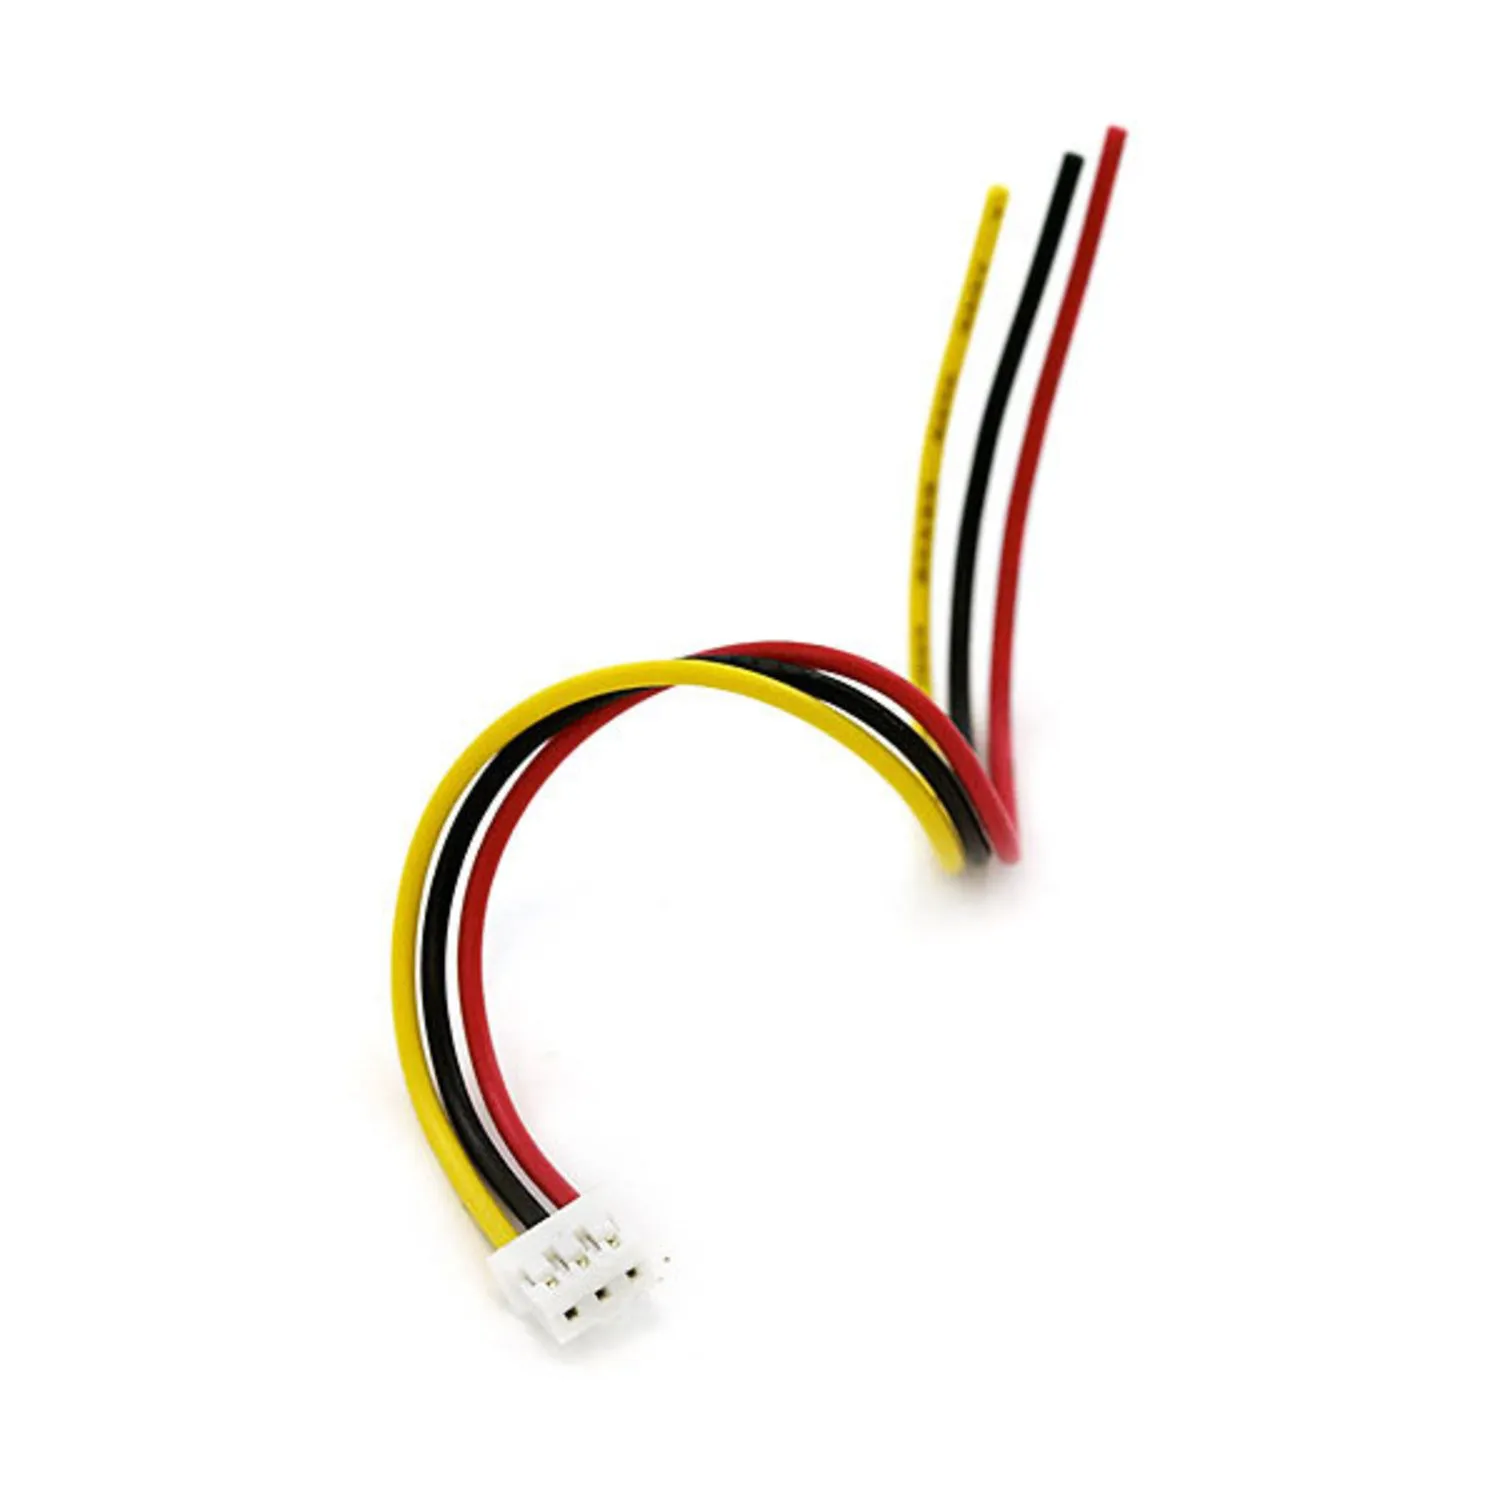 Photo of Infrared Sensor Jumper Wire - 3-Pin JST